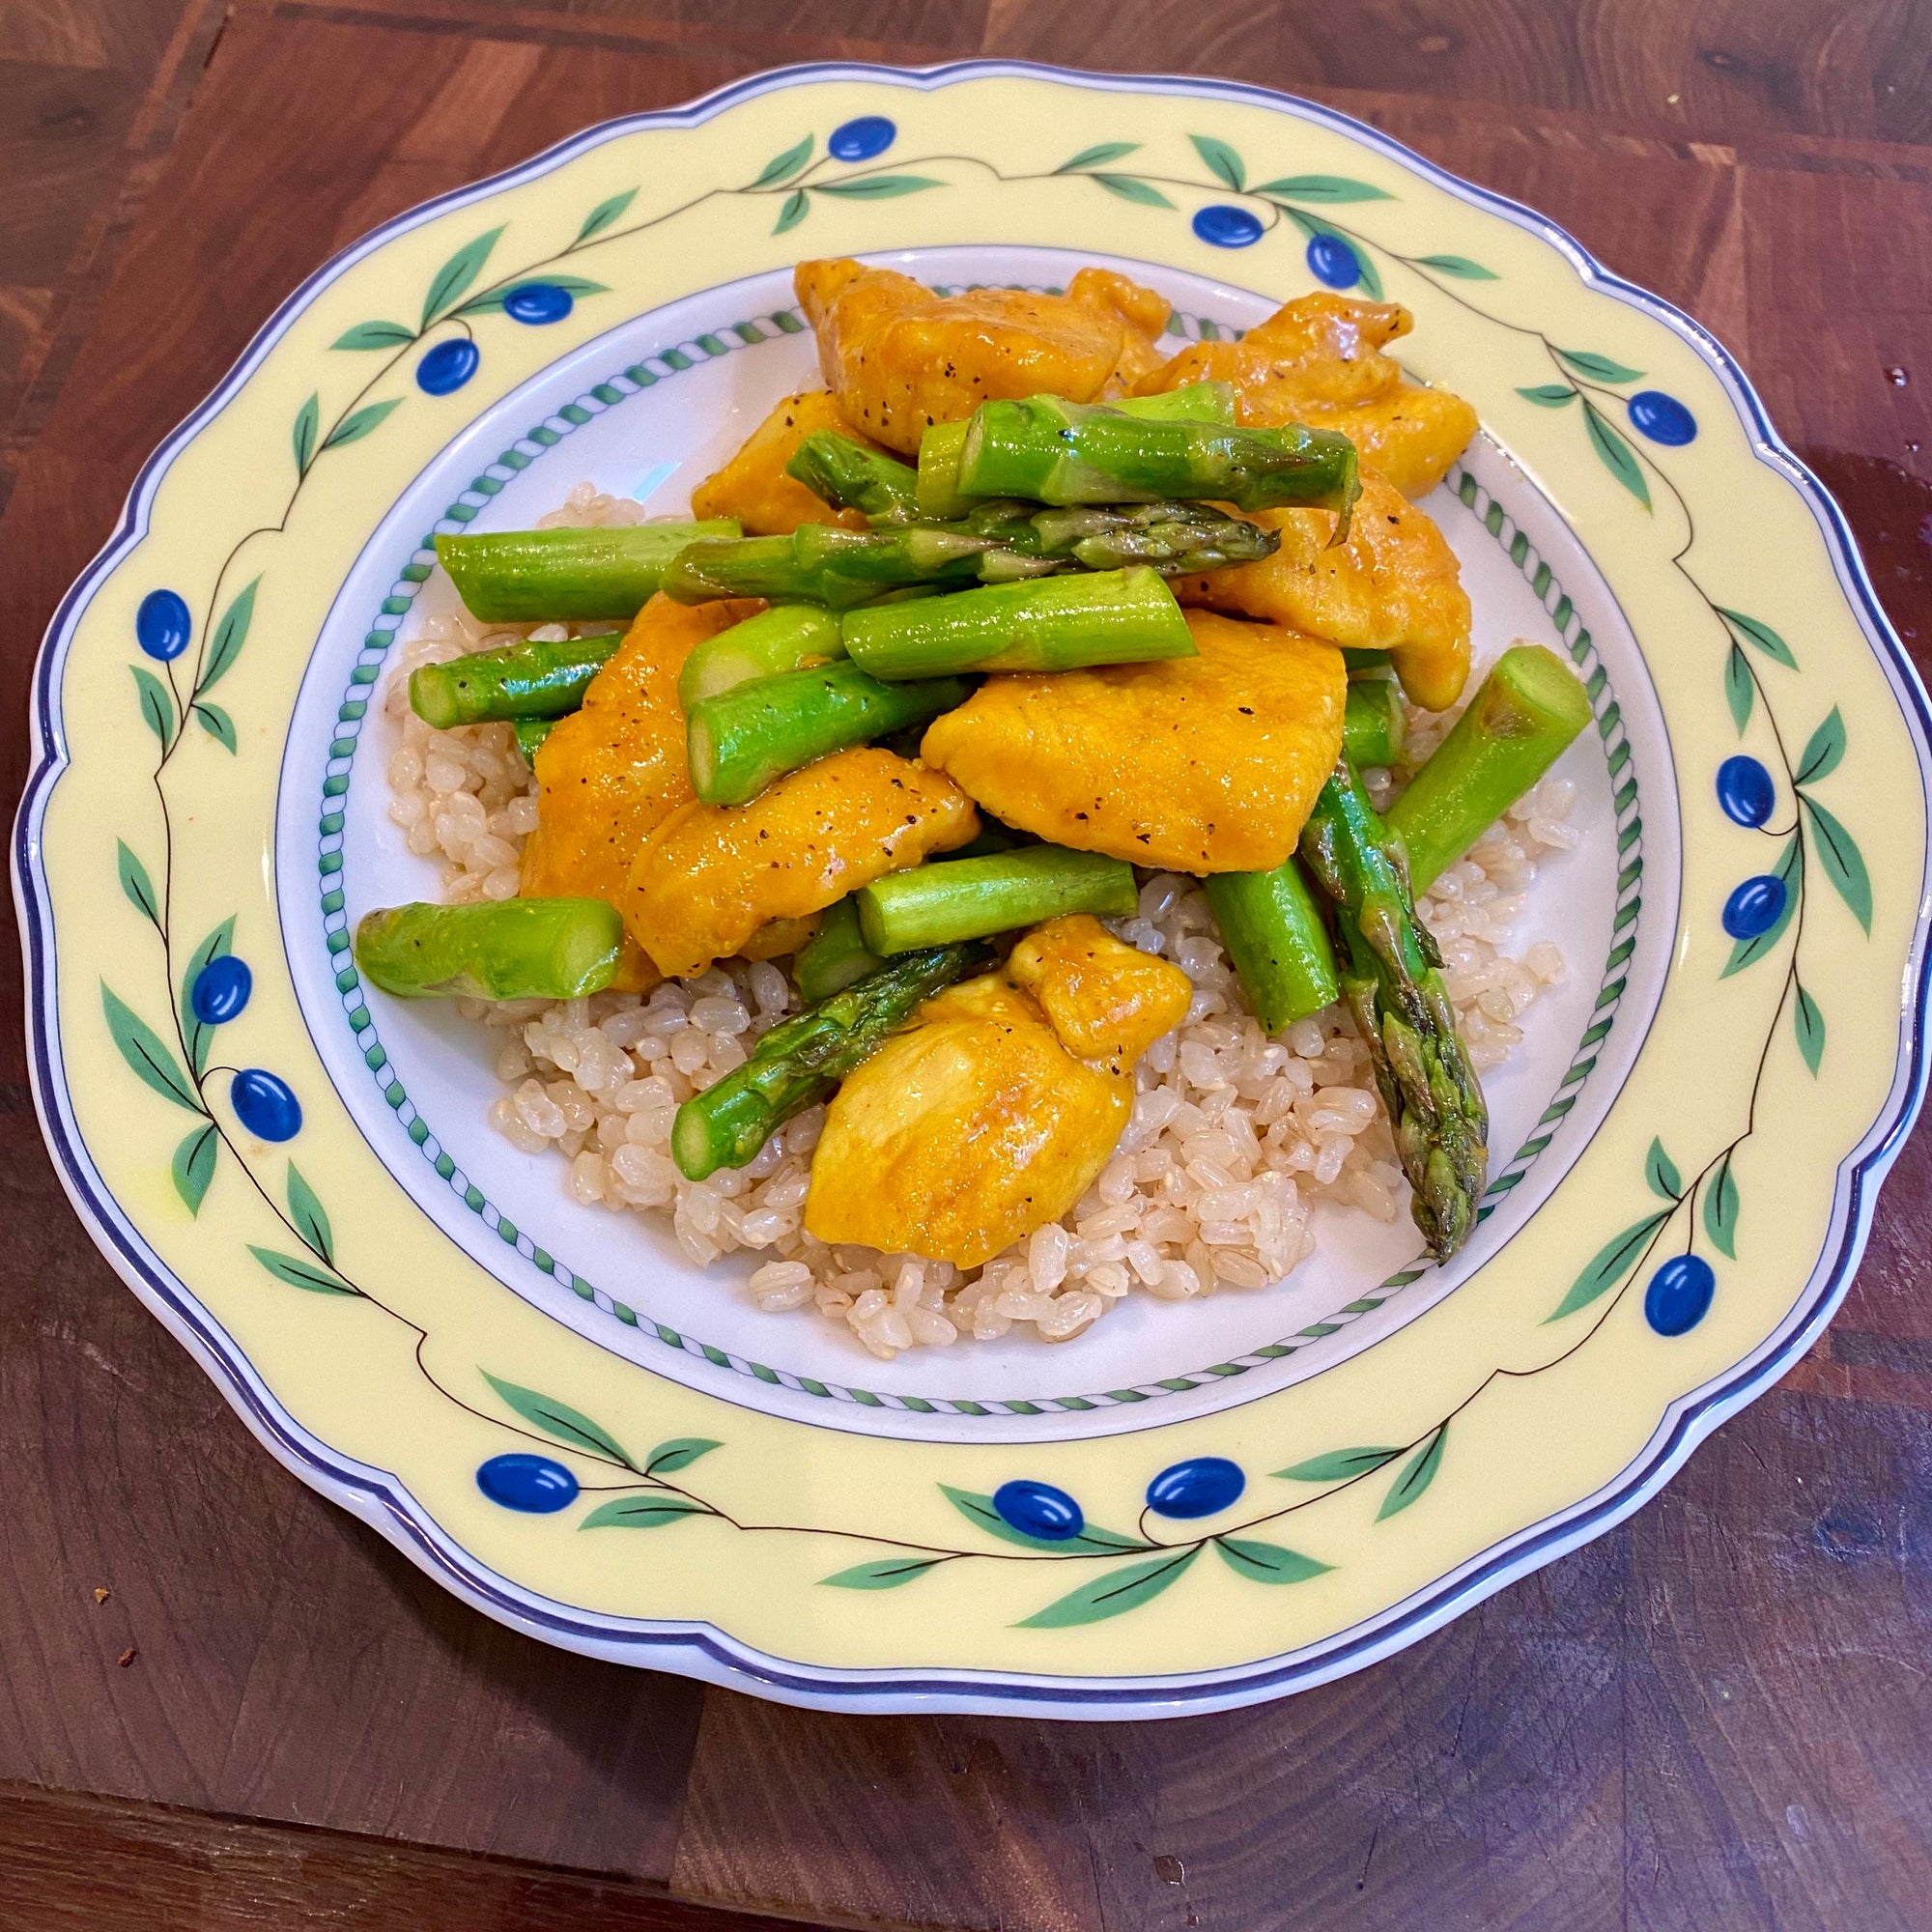 Turmeric-Black Pepper Chicken & Asparagus Inspired by Ali Slagle of the NYT